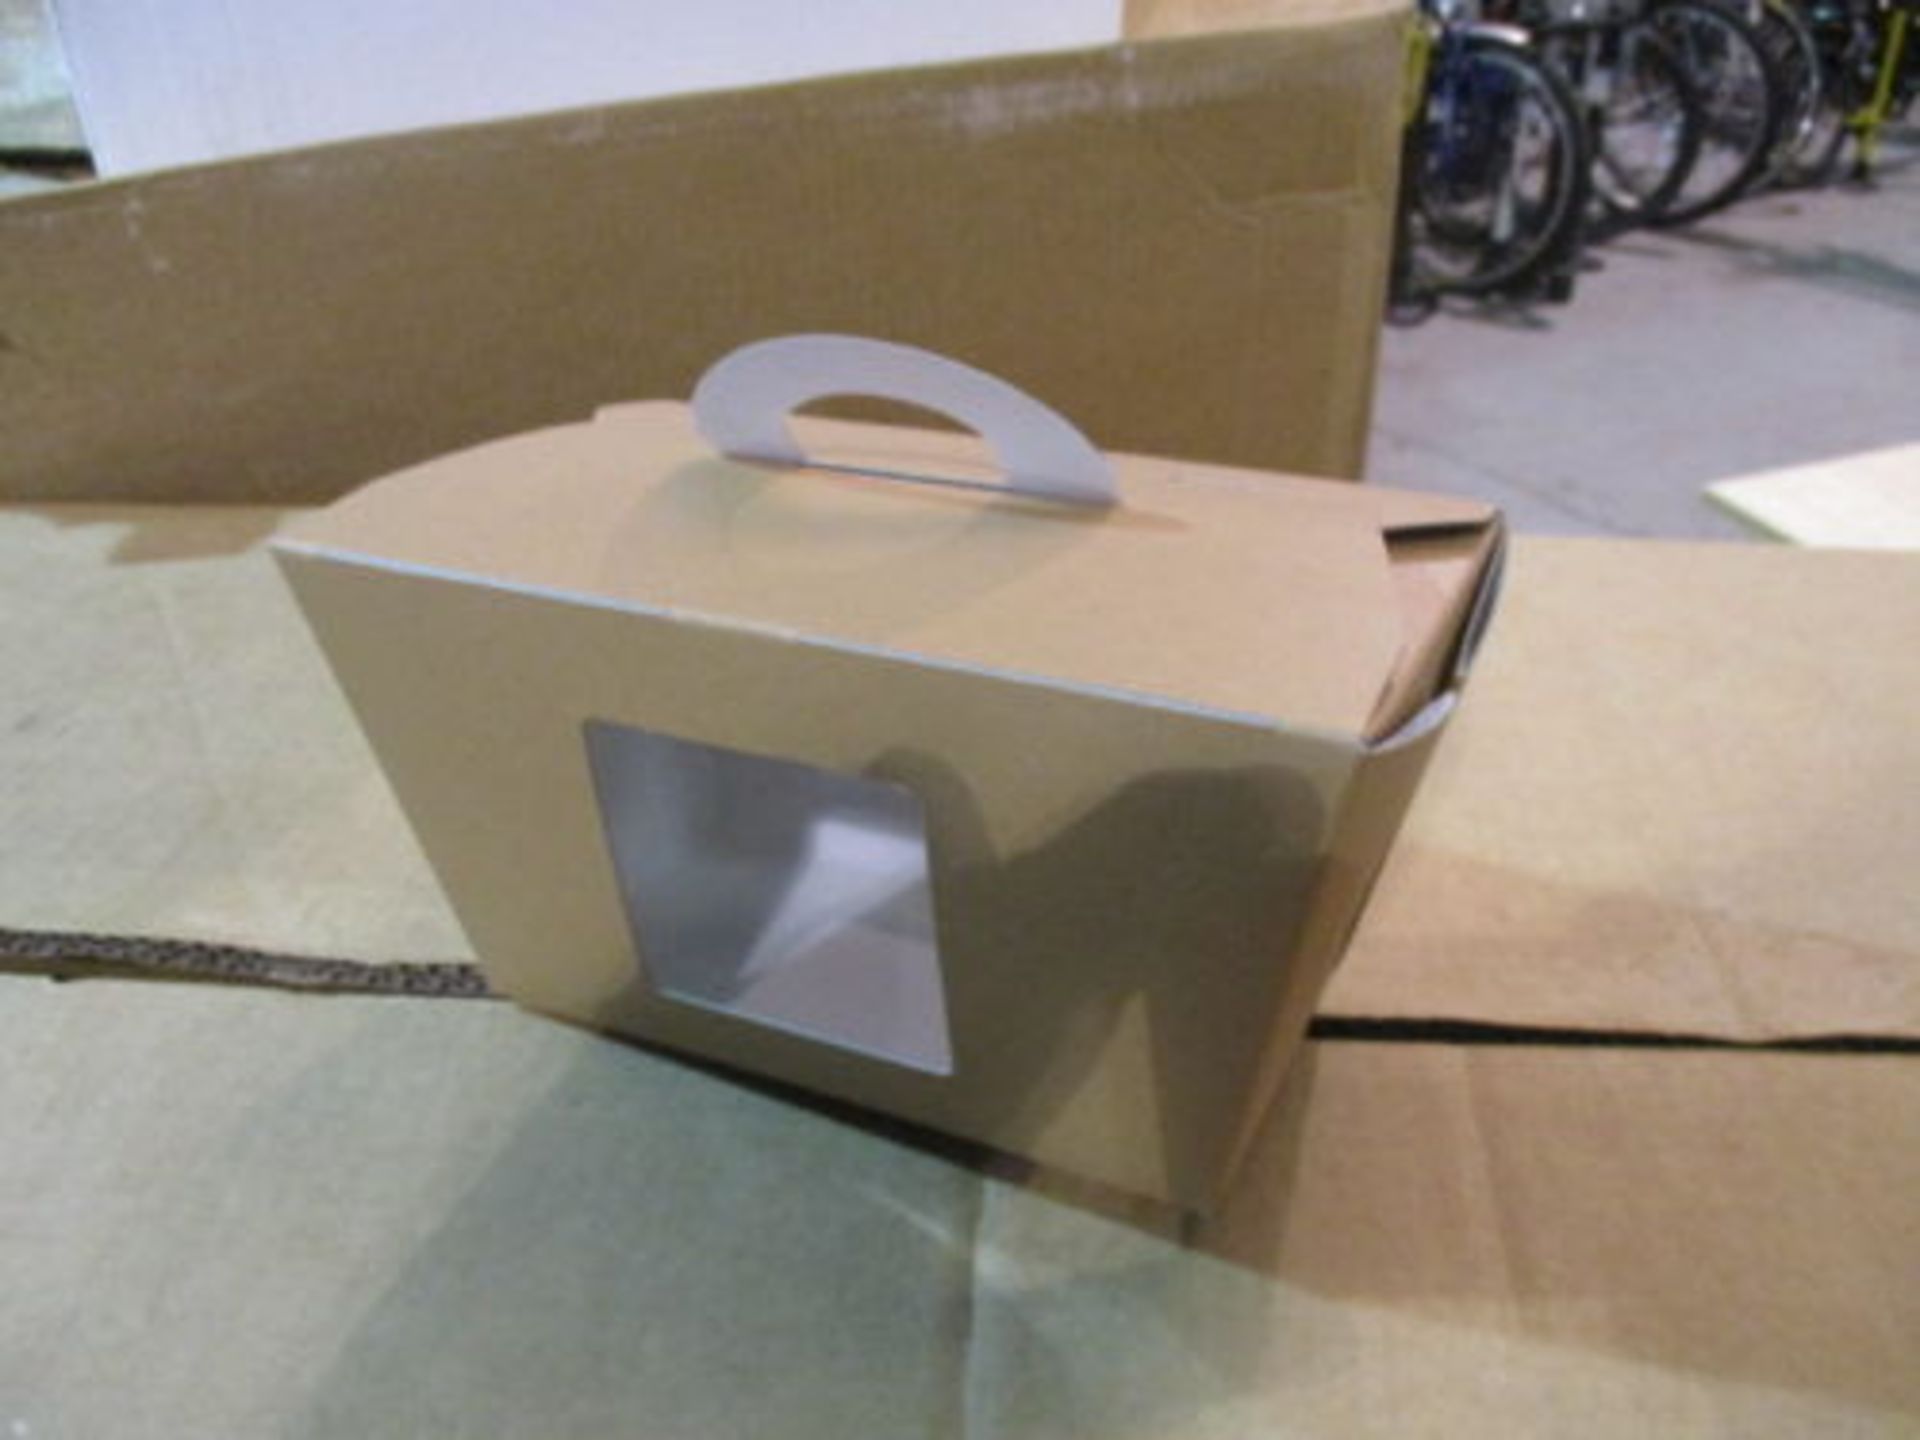 2 x Boxes of Disposable Catering Containers - Ideal for Salad, Rice, Sandwiches etc - Approx 600